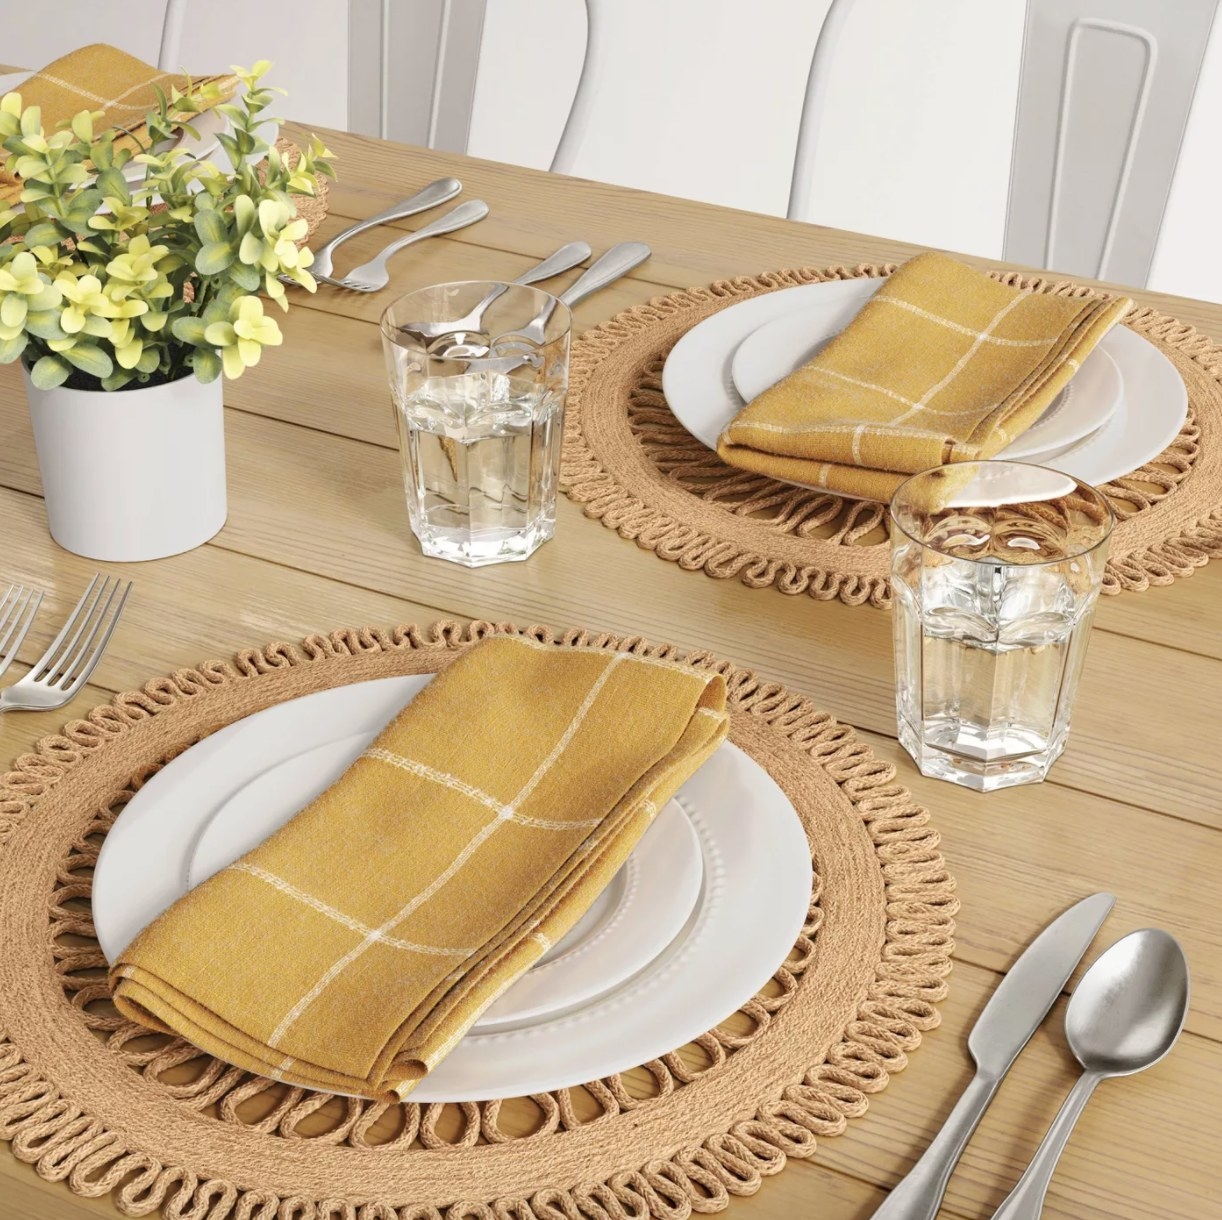 natural woven jute placemat on a dining table with plates, napkins, and silverware